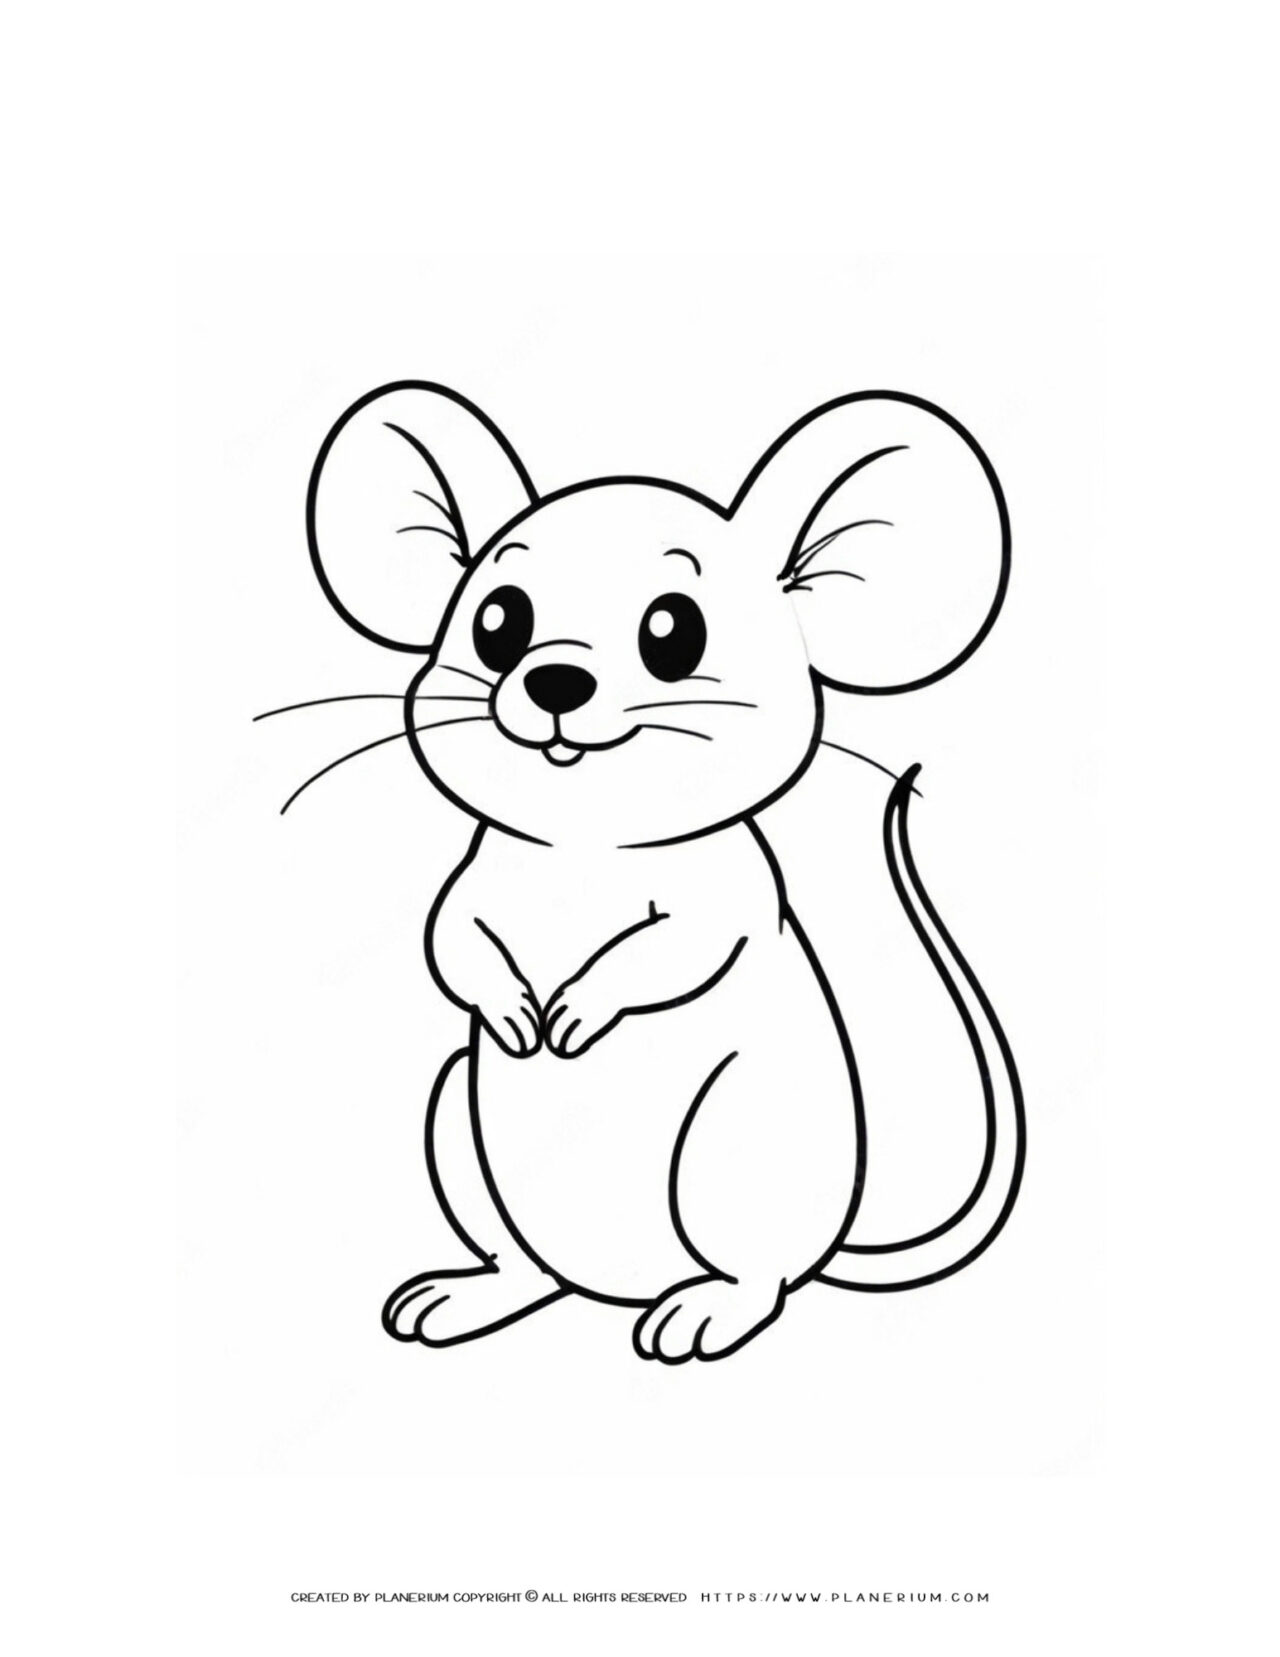 Cute-Mouse-Outline-Animal-Coloring-Page